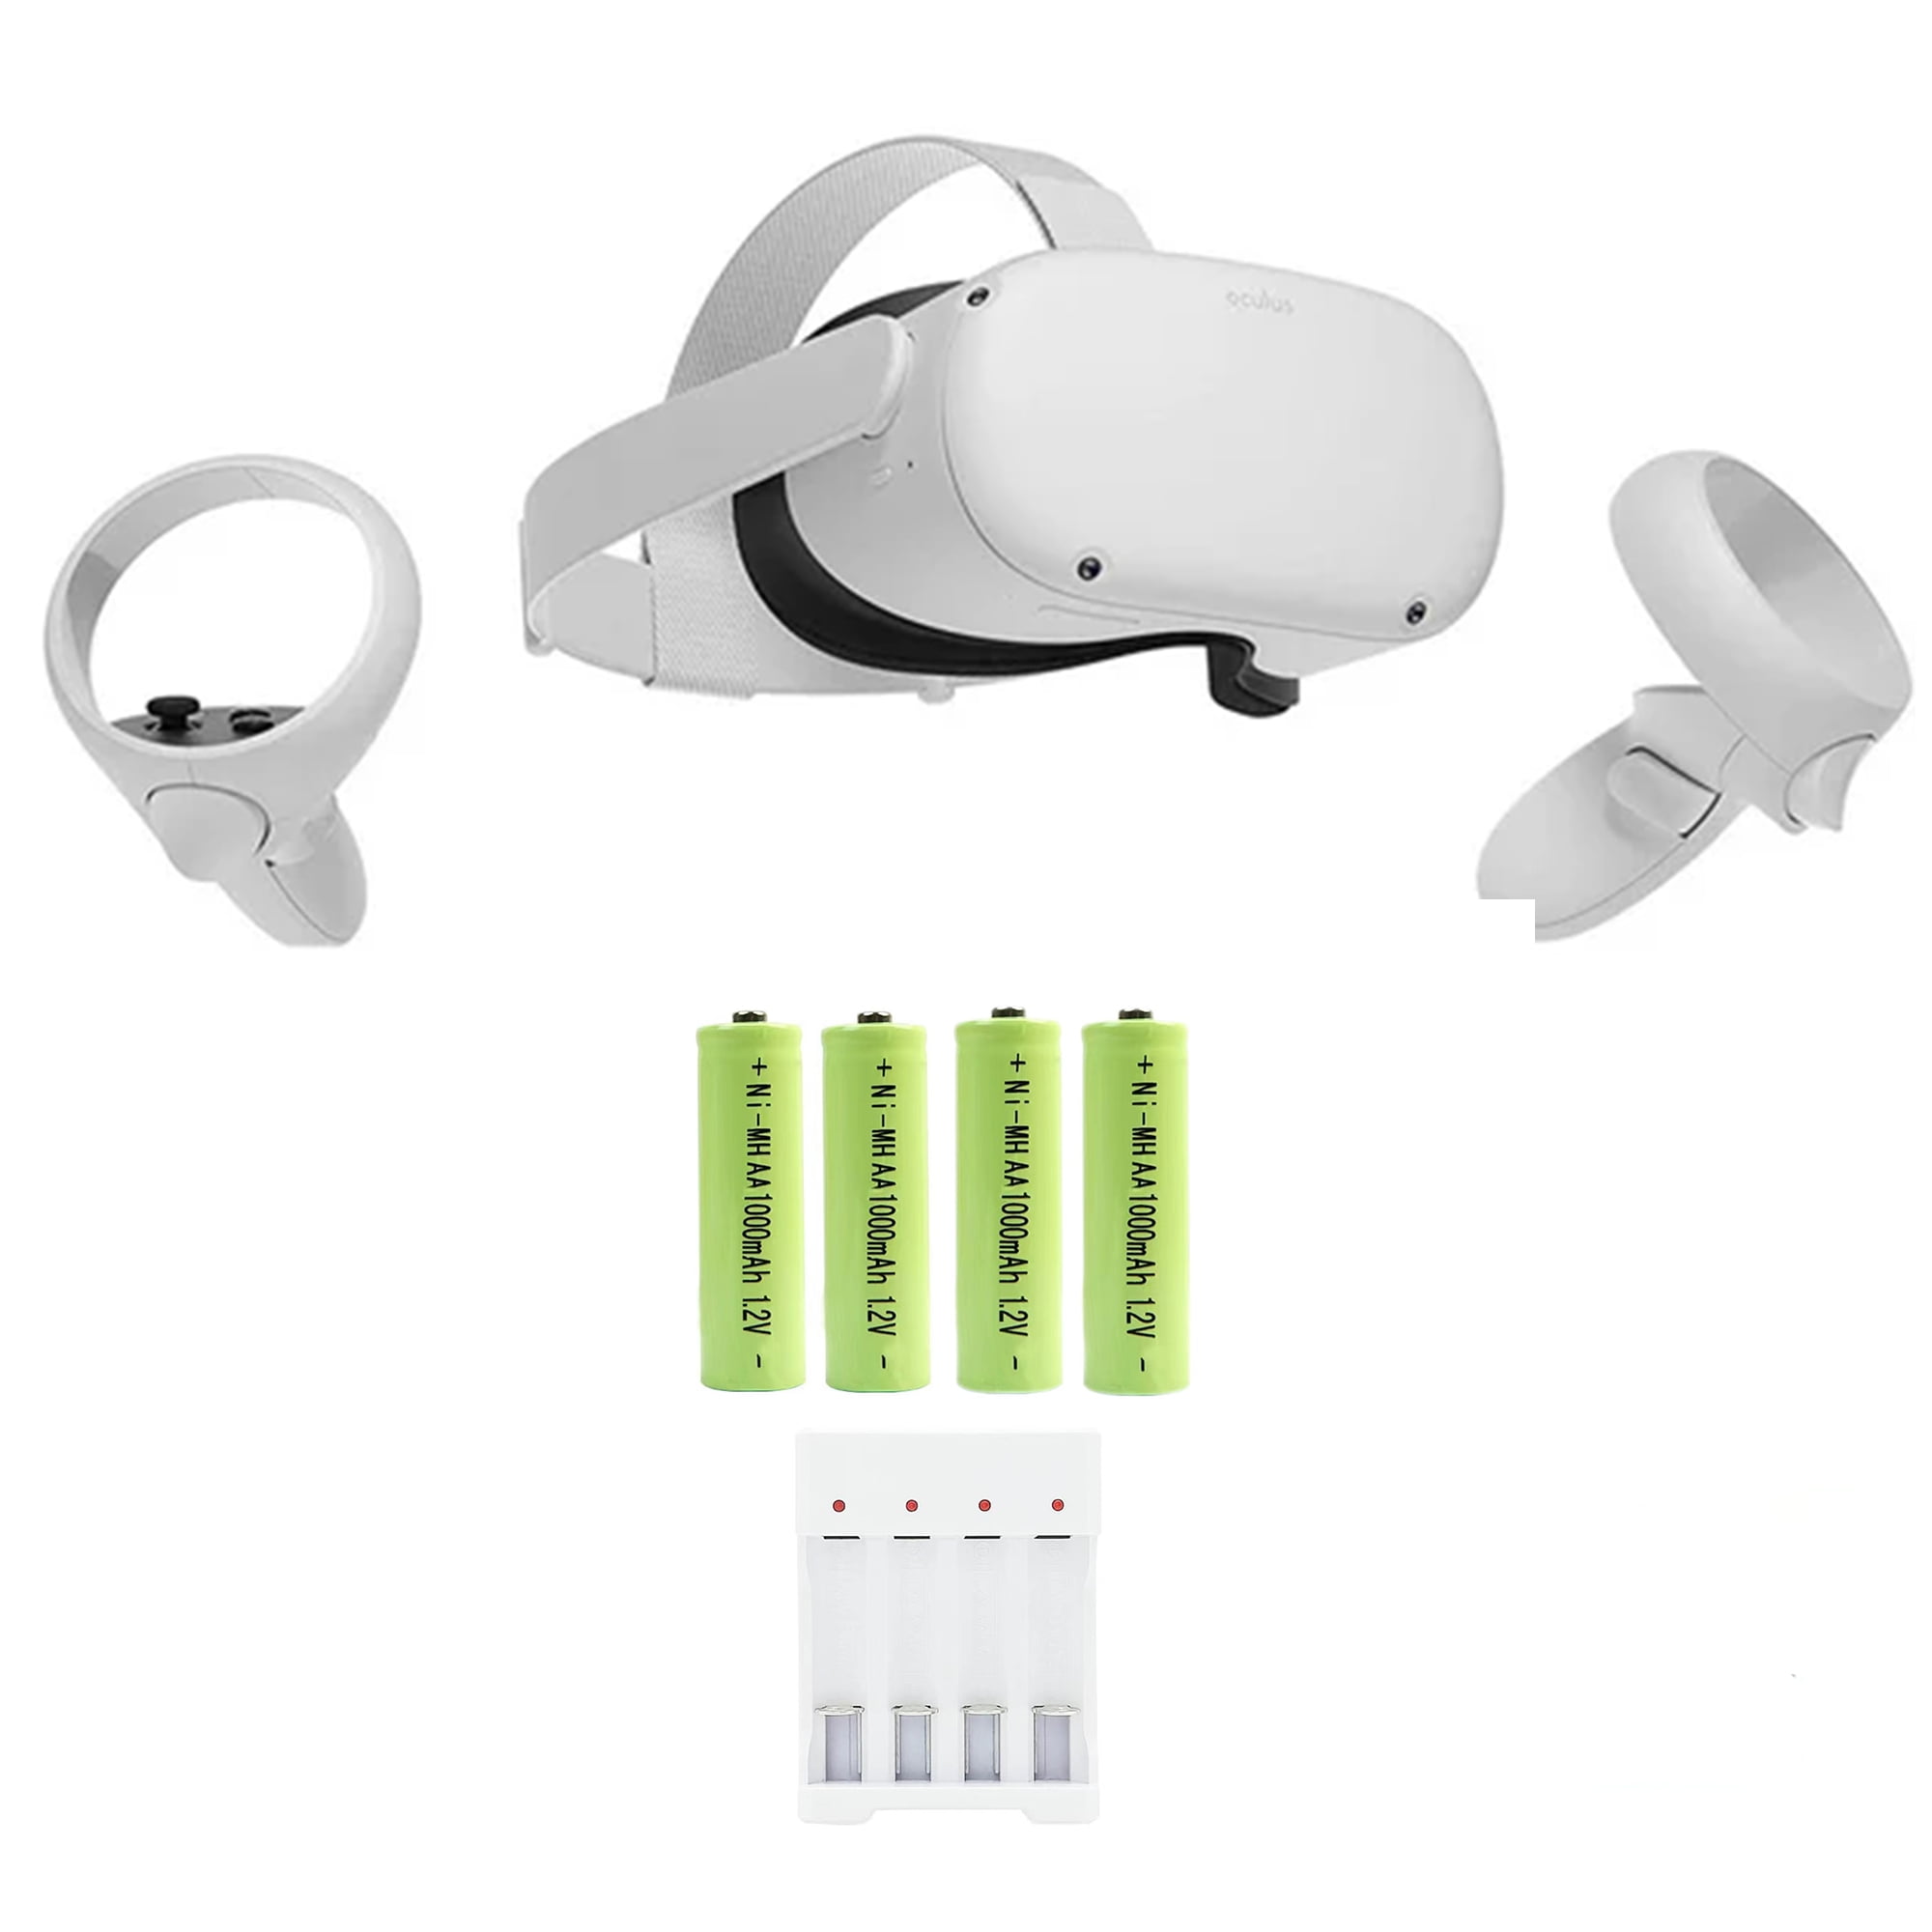 Oculus Quest 2 All in One Virtual Reality GB Gaming Headset, Touch  Controllers, with 4 AA Rechargeable Batteries and Charger Accessories Set